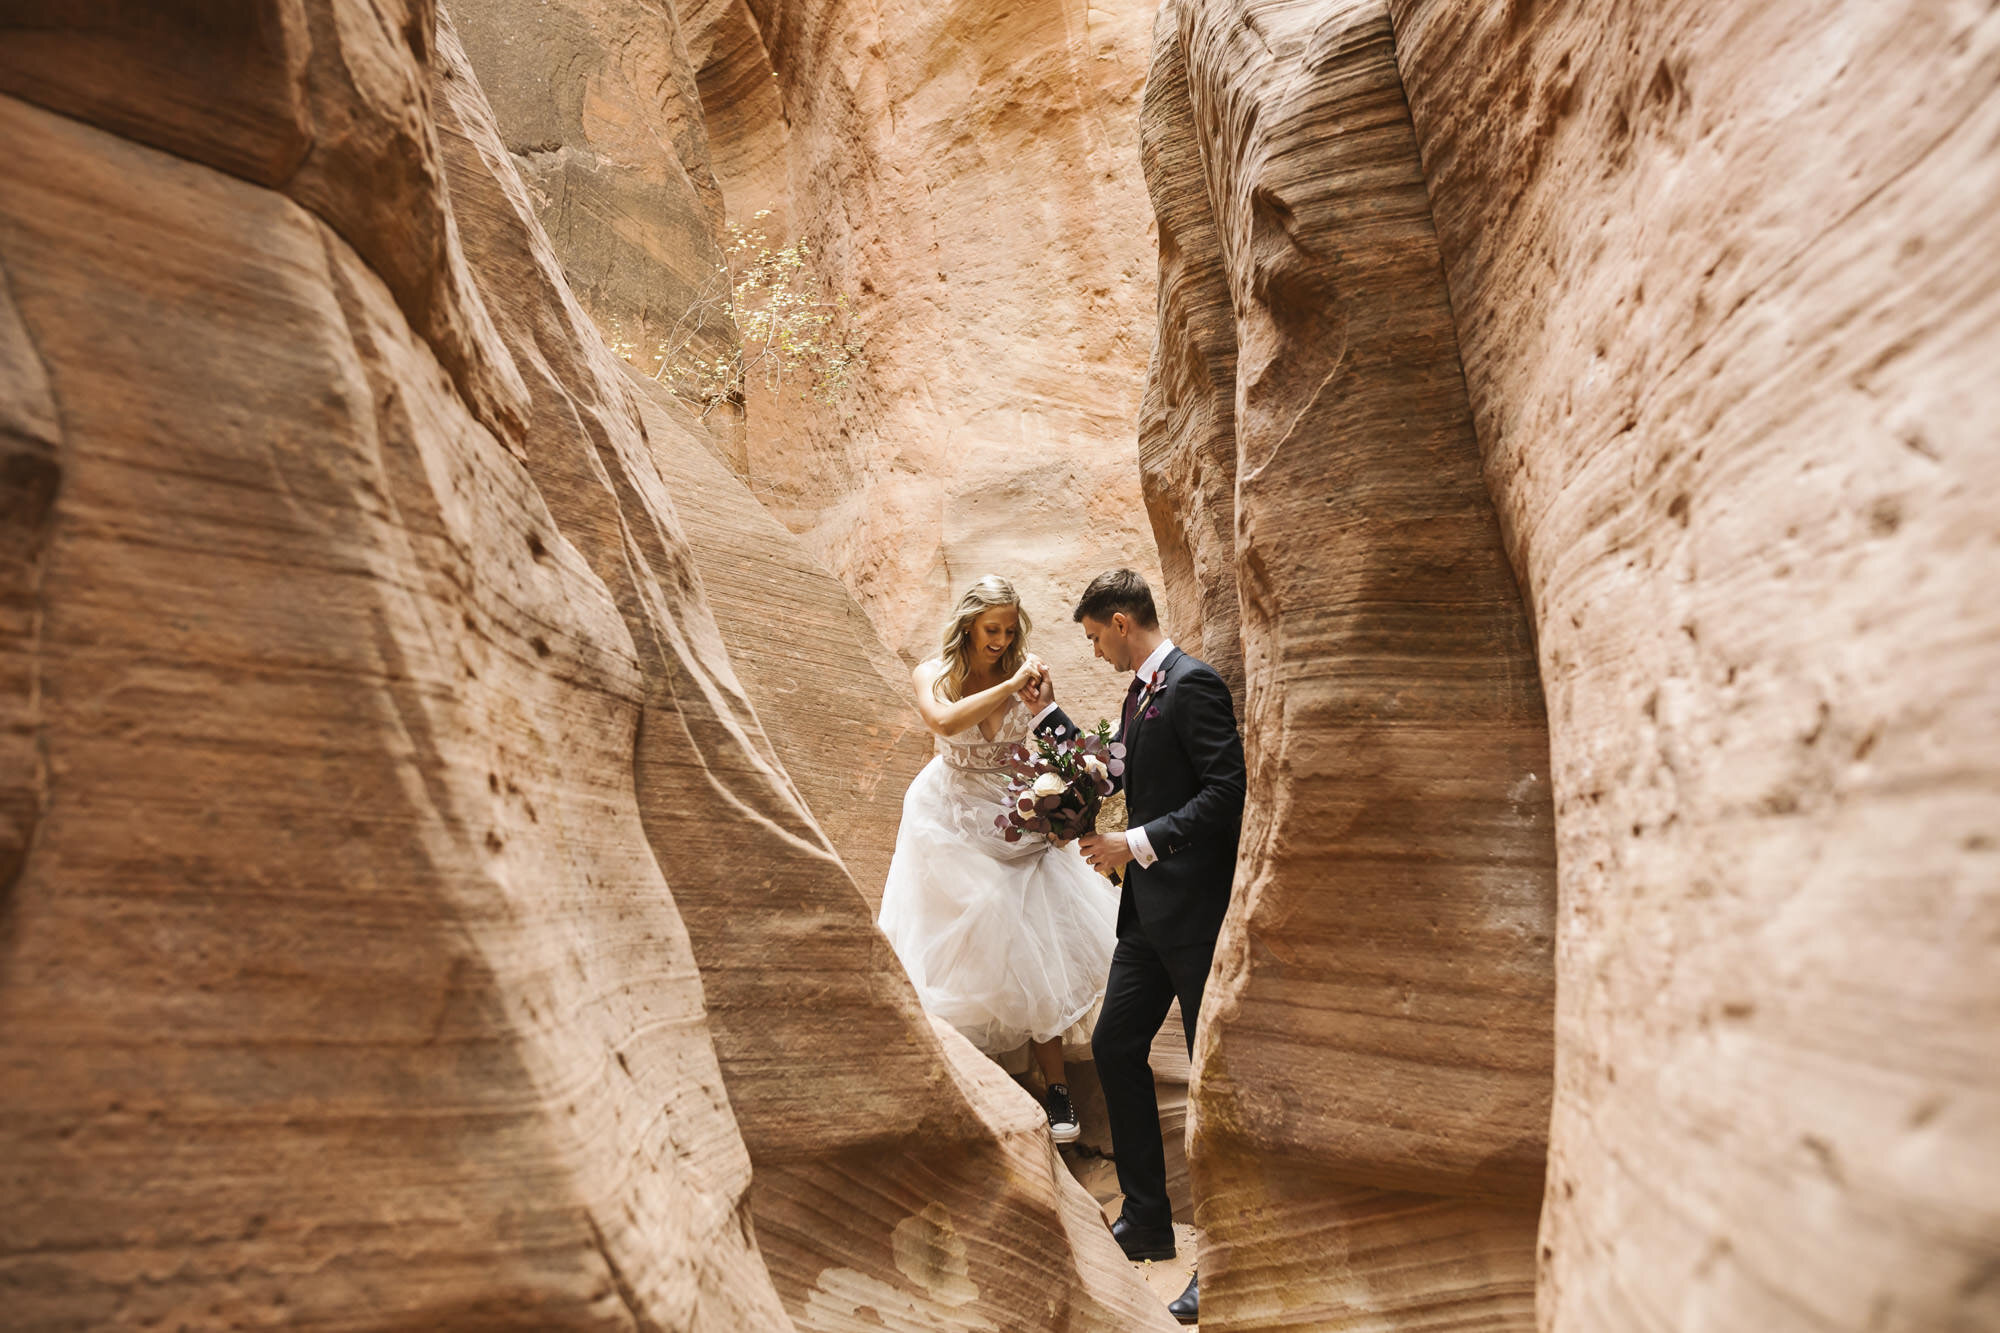 Groom gives his bride a hand as they walk through a slot canyon in Utah